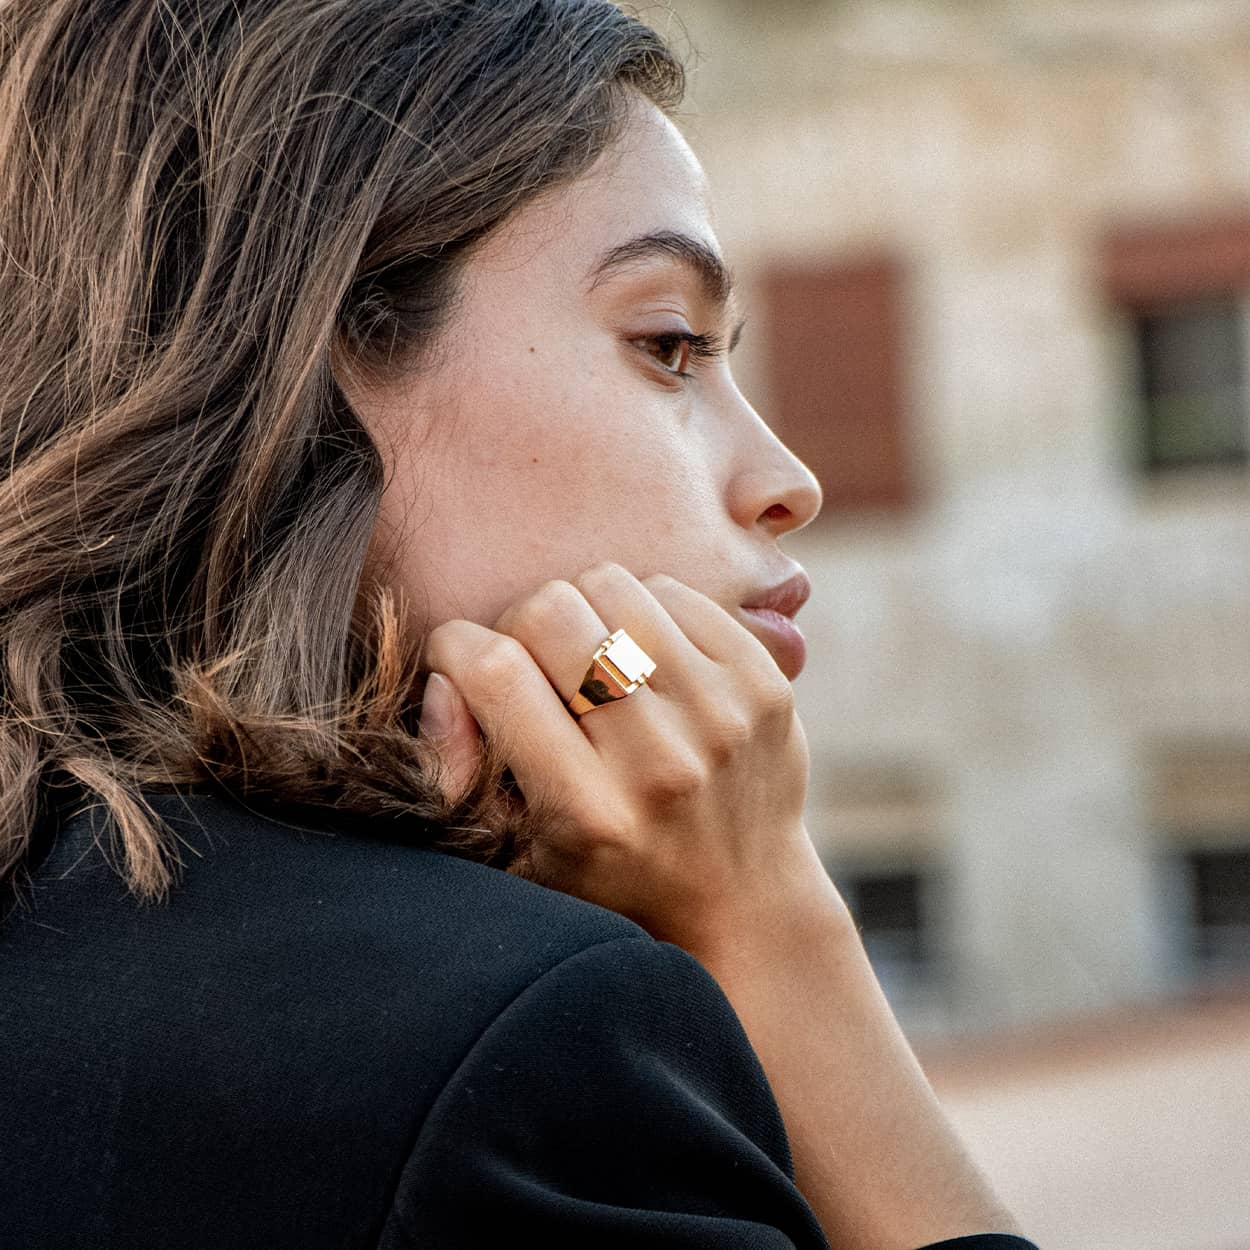 Atelier Domingo's Square ring is a promise of timeless elegance. This ring has been designed in France and is made in Spain, for both men and women. Handcrafted for a vintage finishing, this jewelry is made of a high-quality 24 karat gold plating.